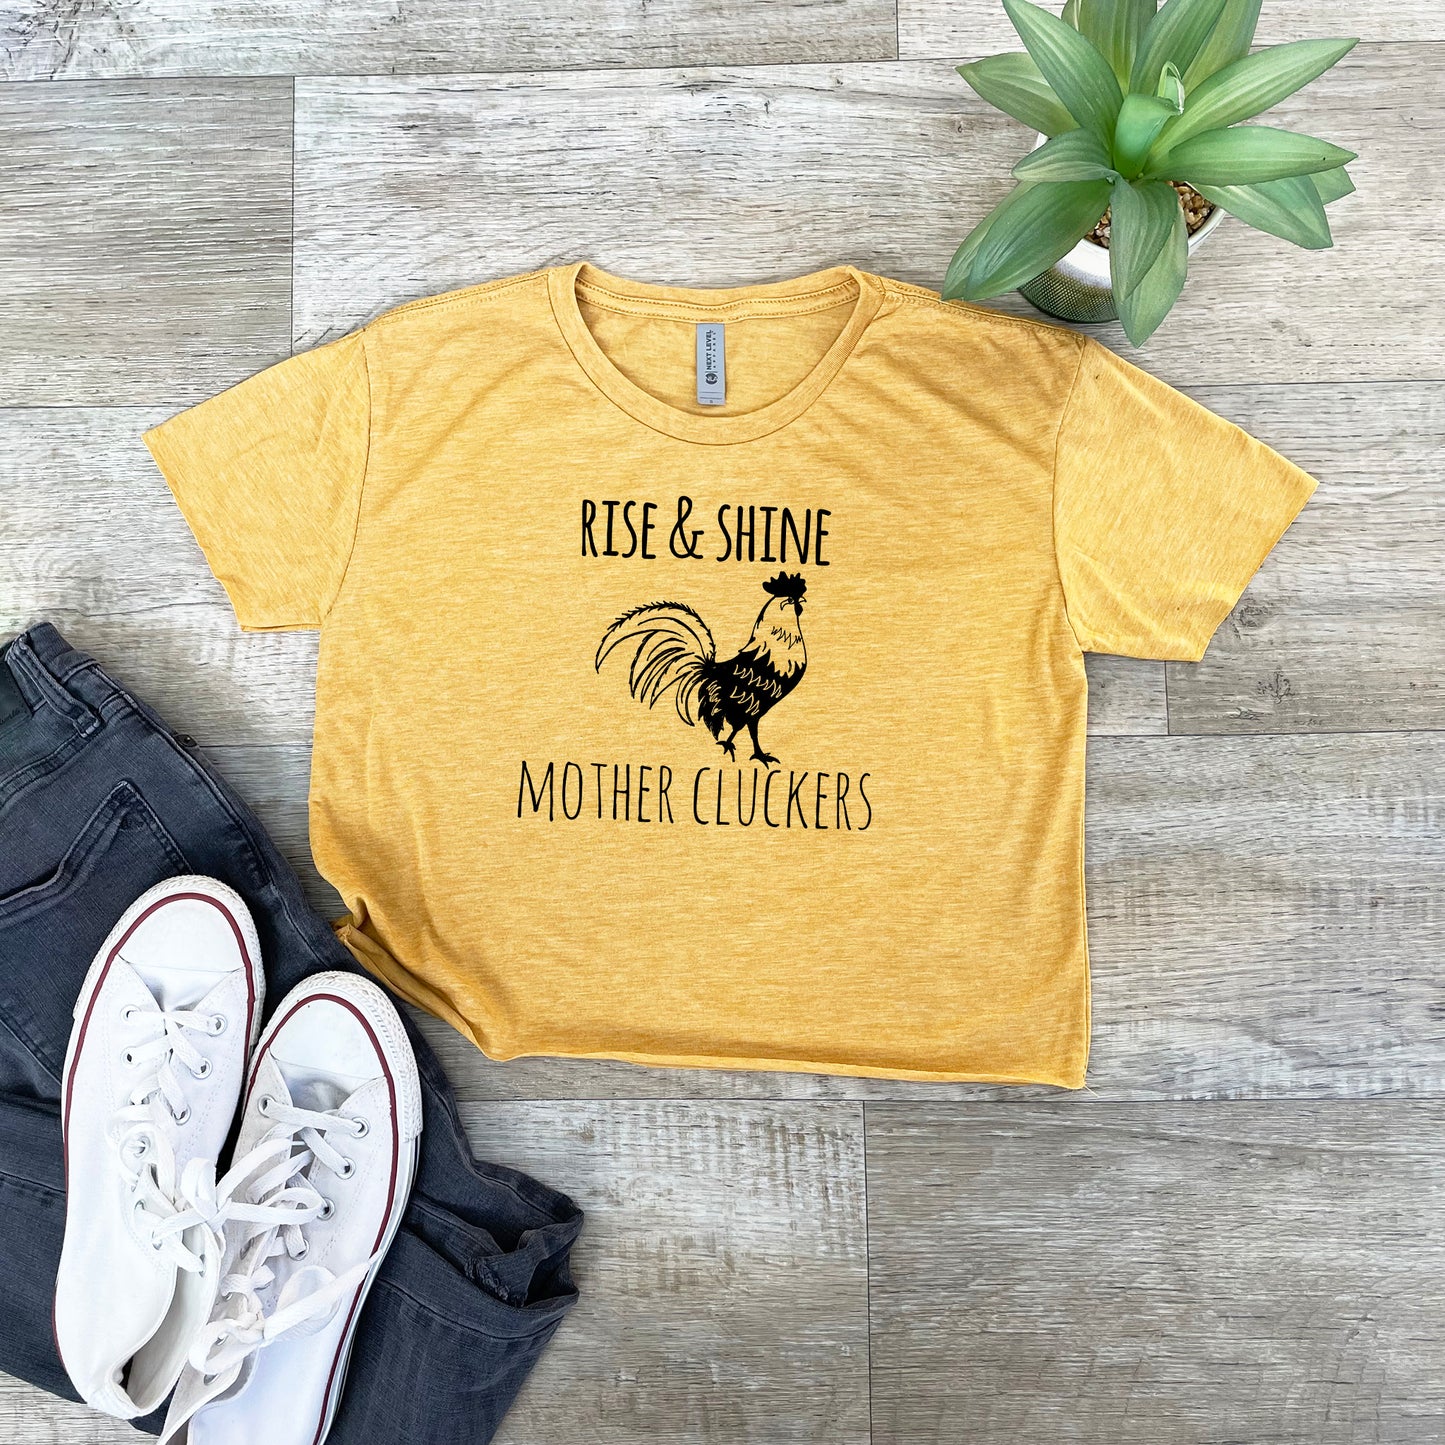 Rise & Shine Mother Cluckers - Women's Crop Tee - Heather Gray or Gold